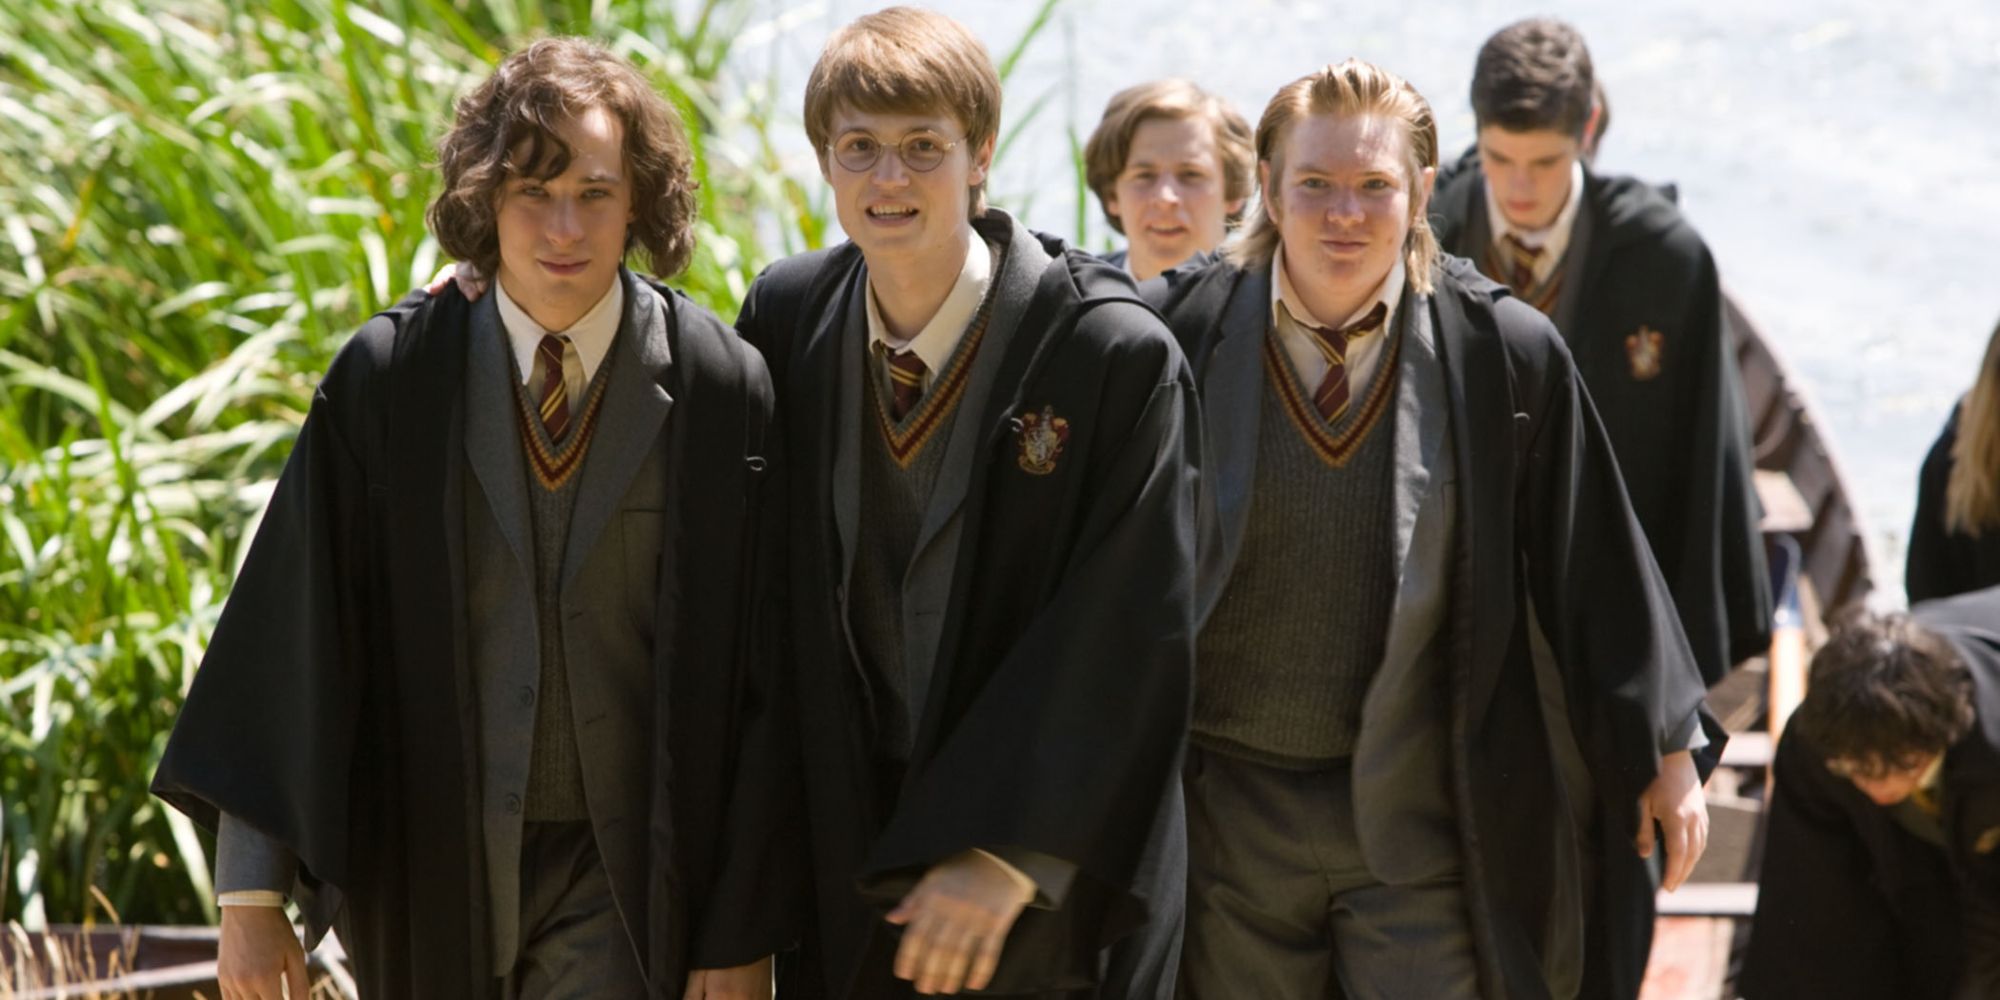 The Marauders as students in Harry Potter. 